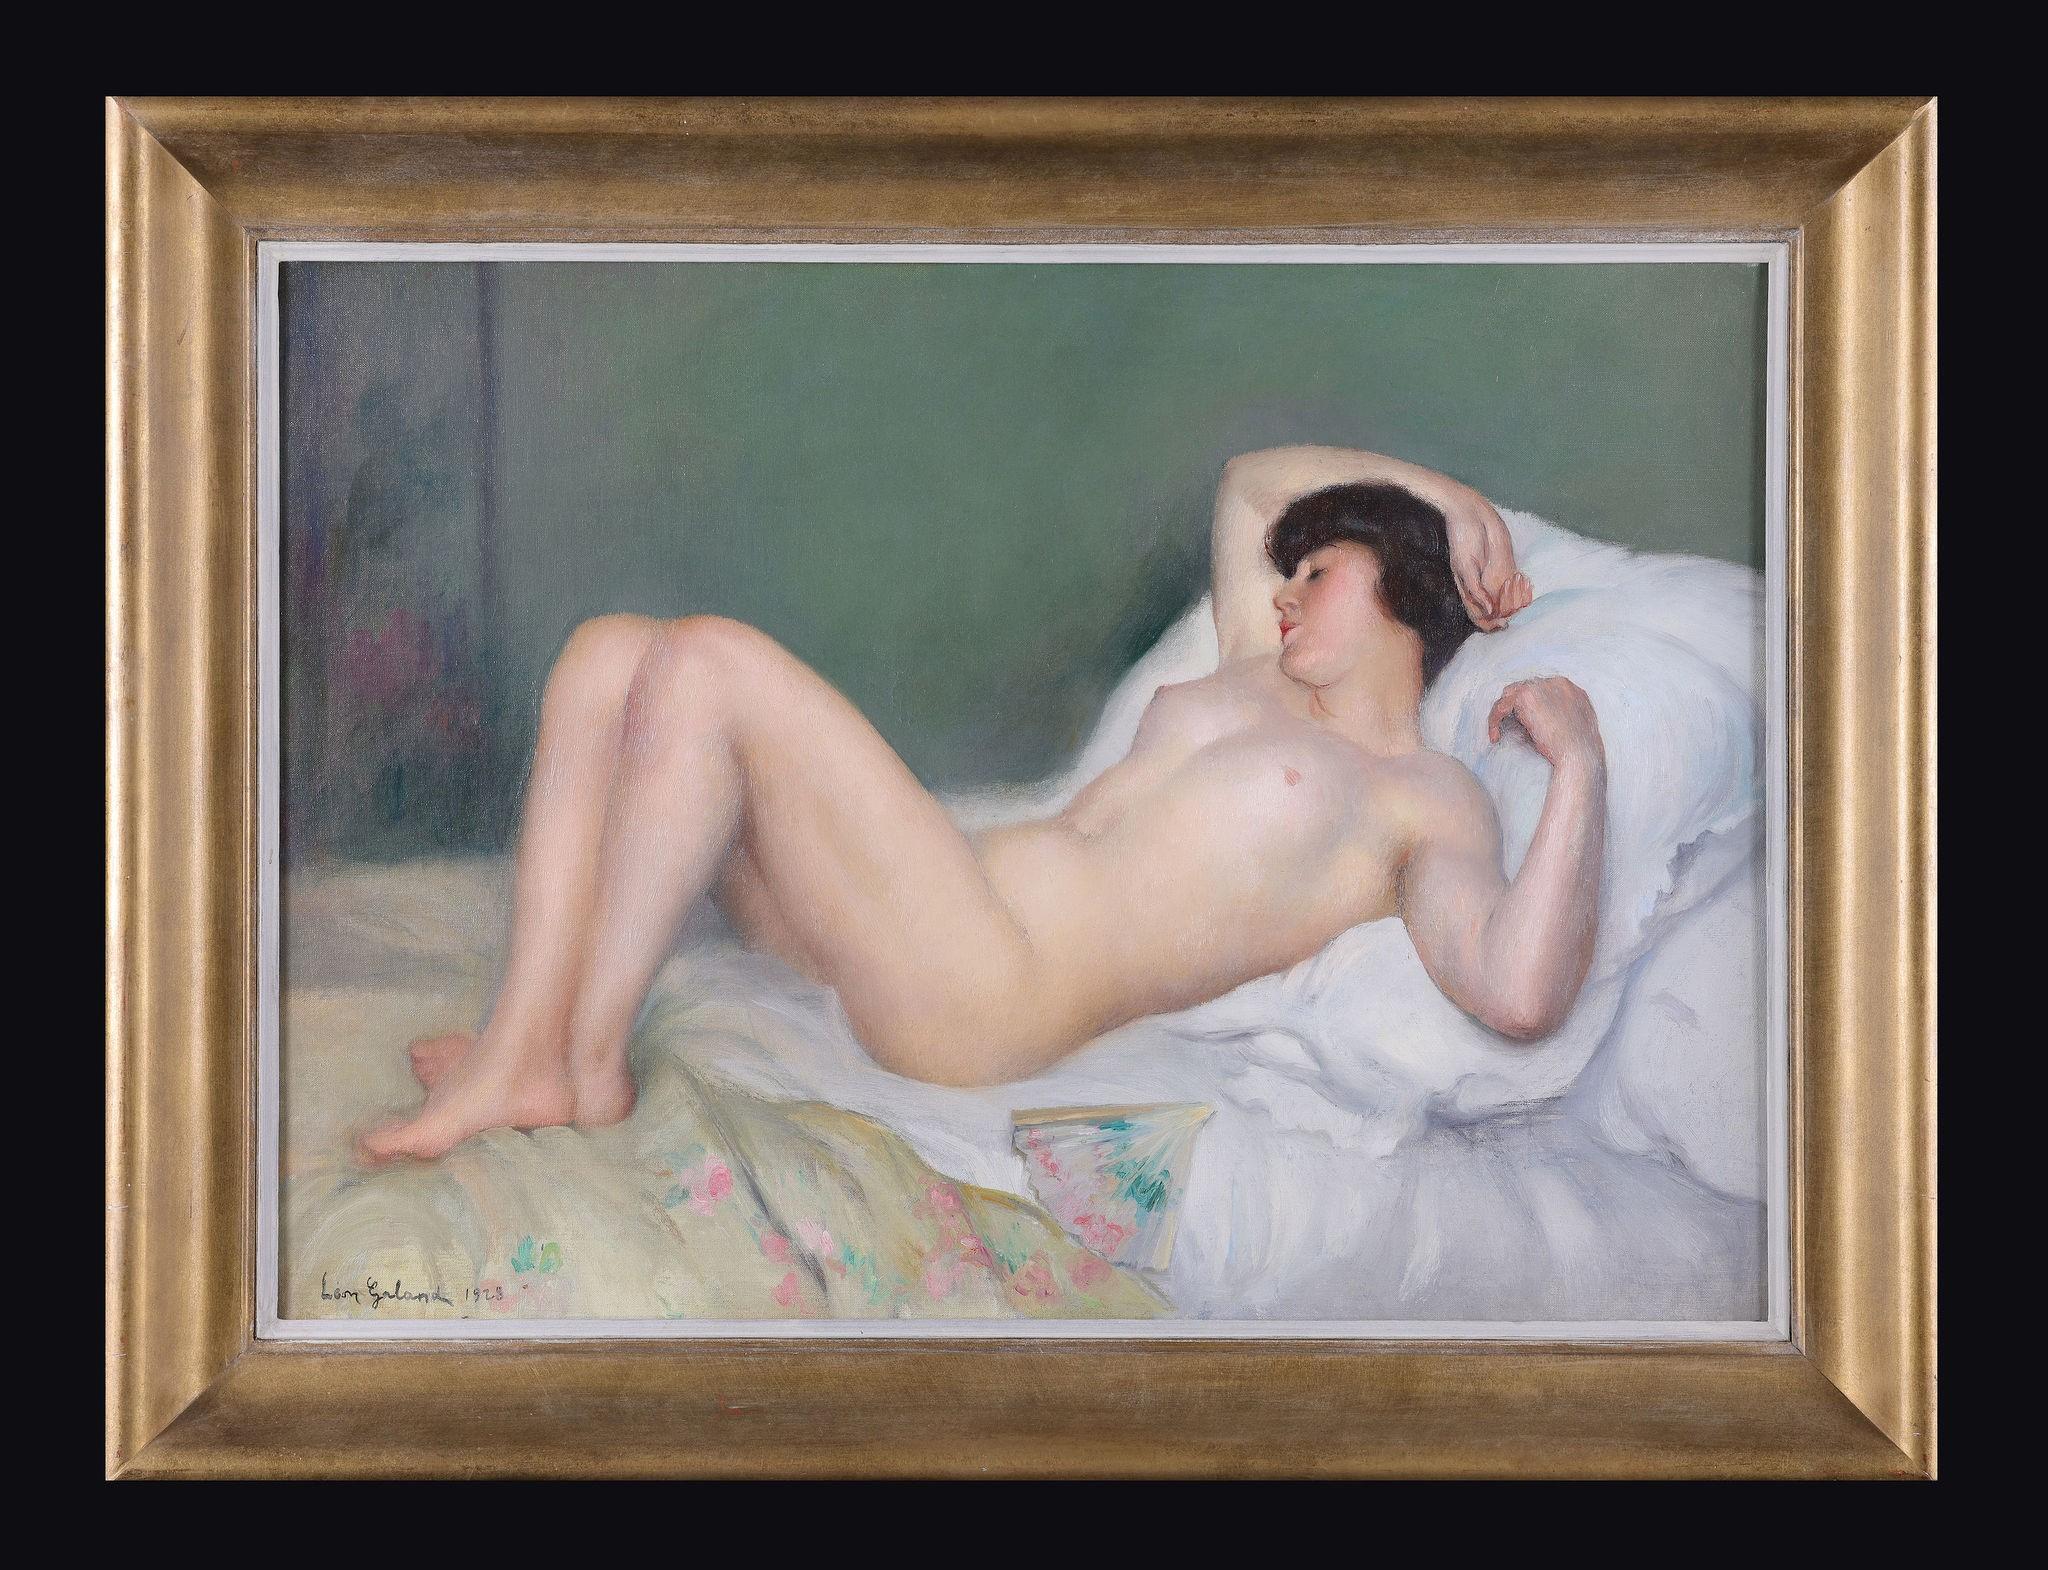 Leon Galand Nude Painting - A Naked Beauty Lying with her Fan